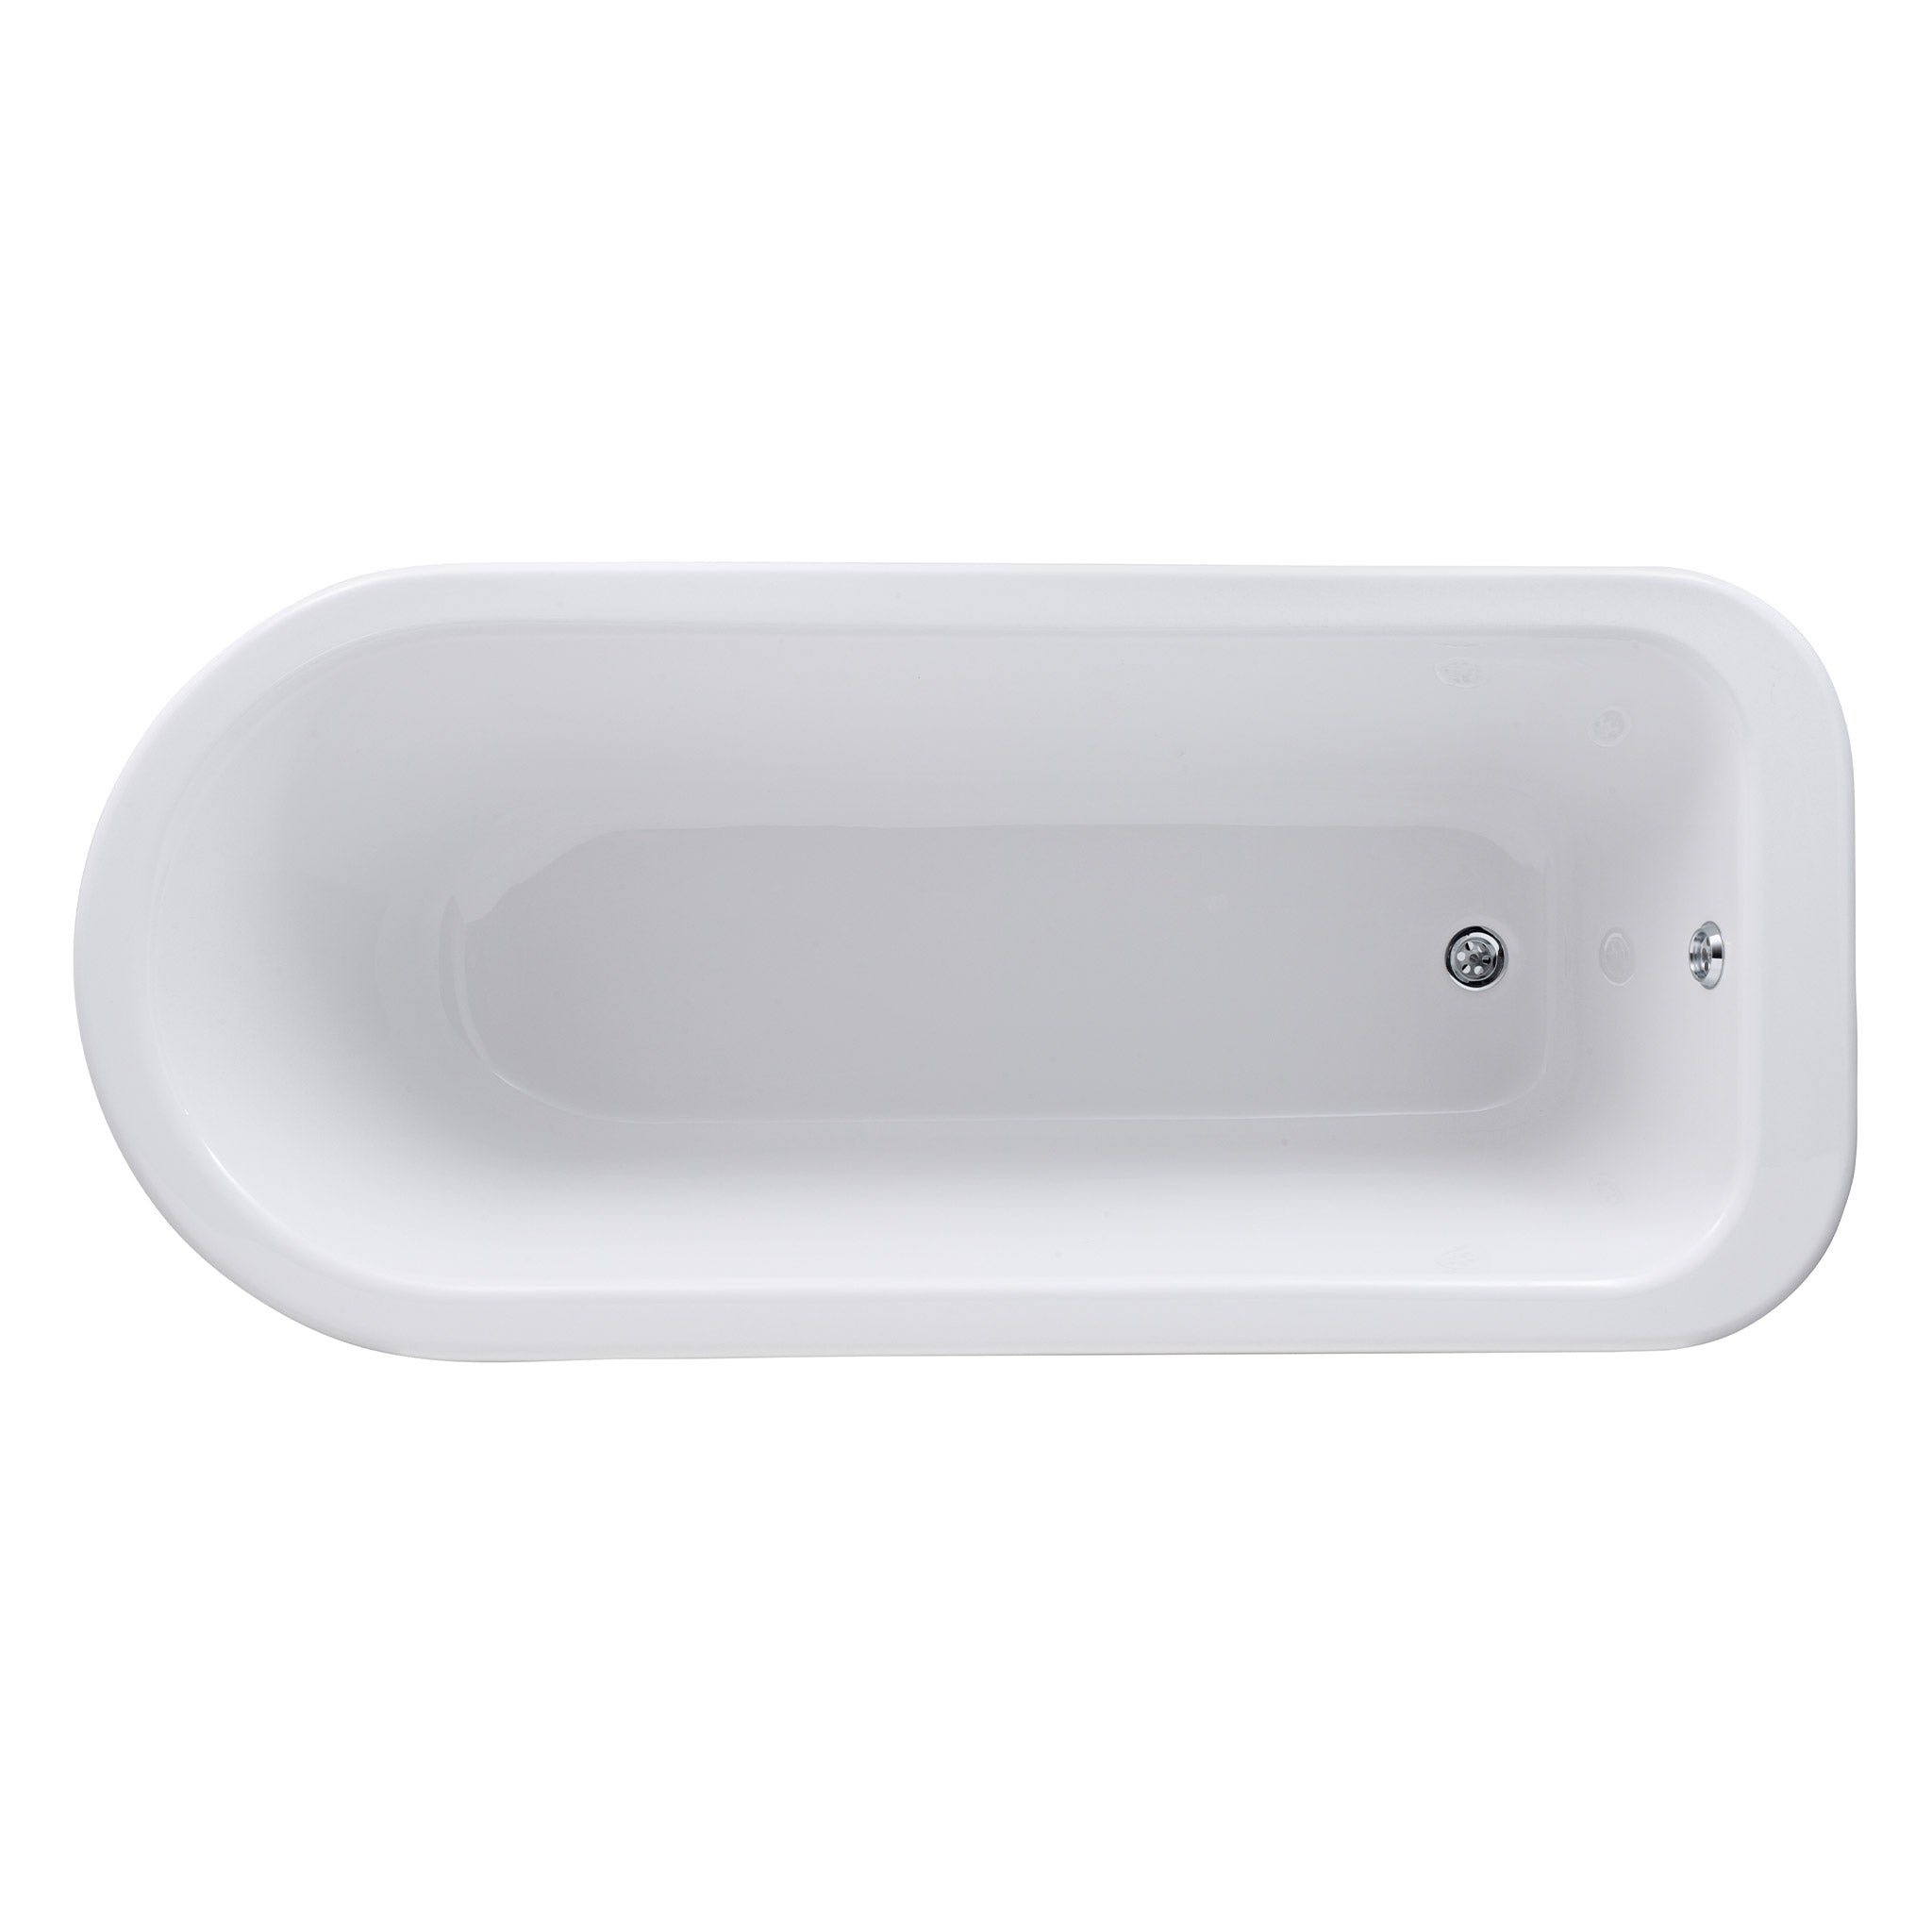 Bayswater Sutherland Single Ended Freestanding Bath 1690 x 750mm